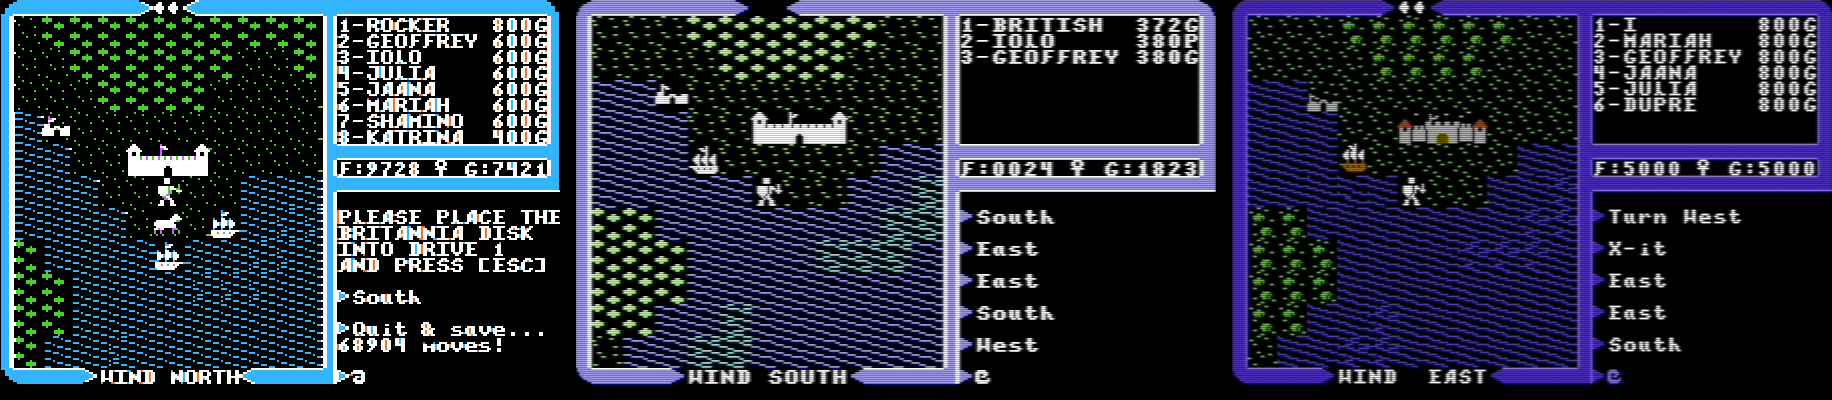 Ultima IV for Apple II, C64, Remastered